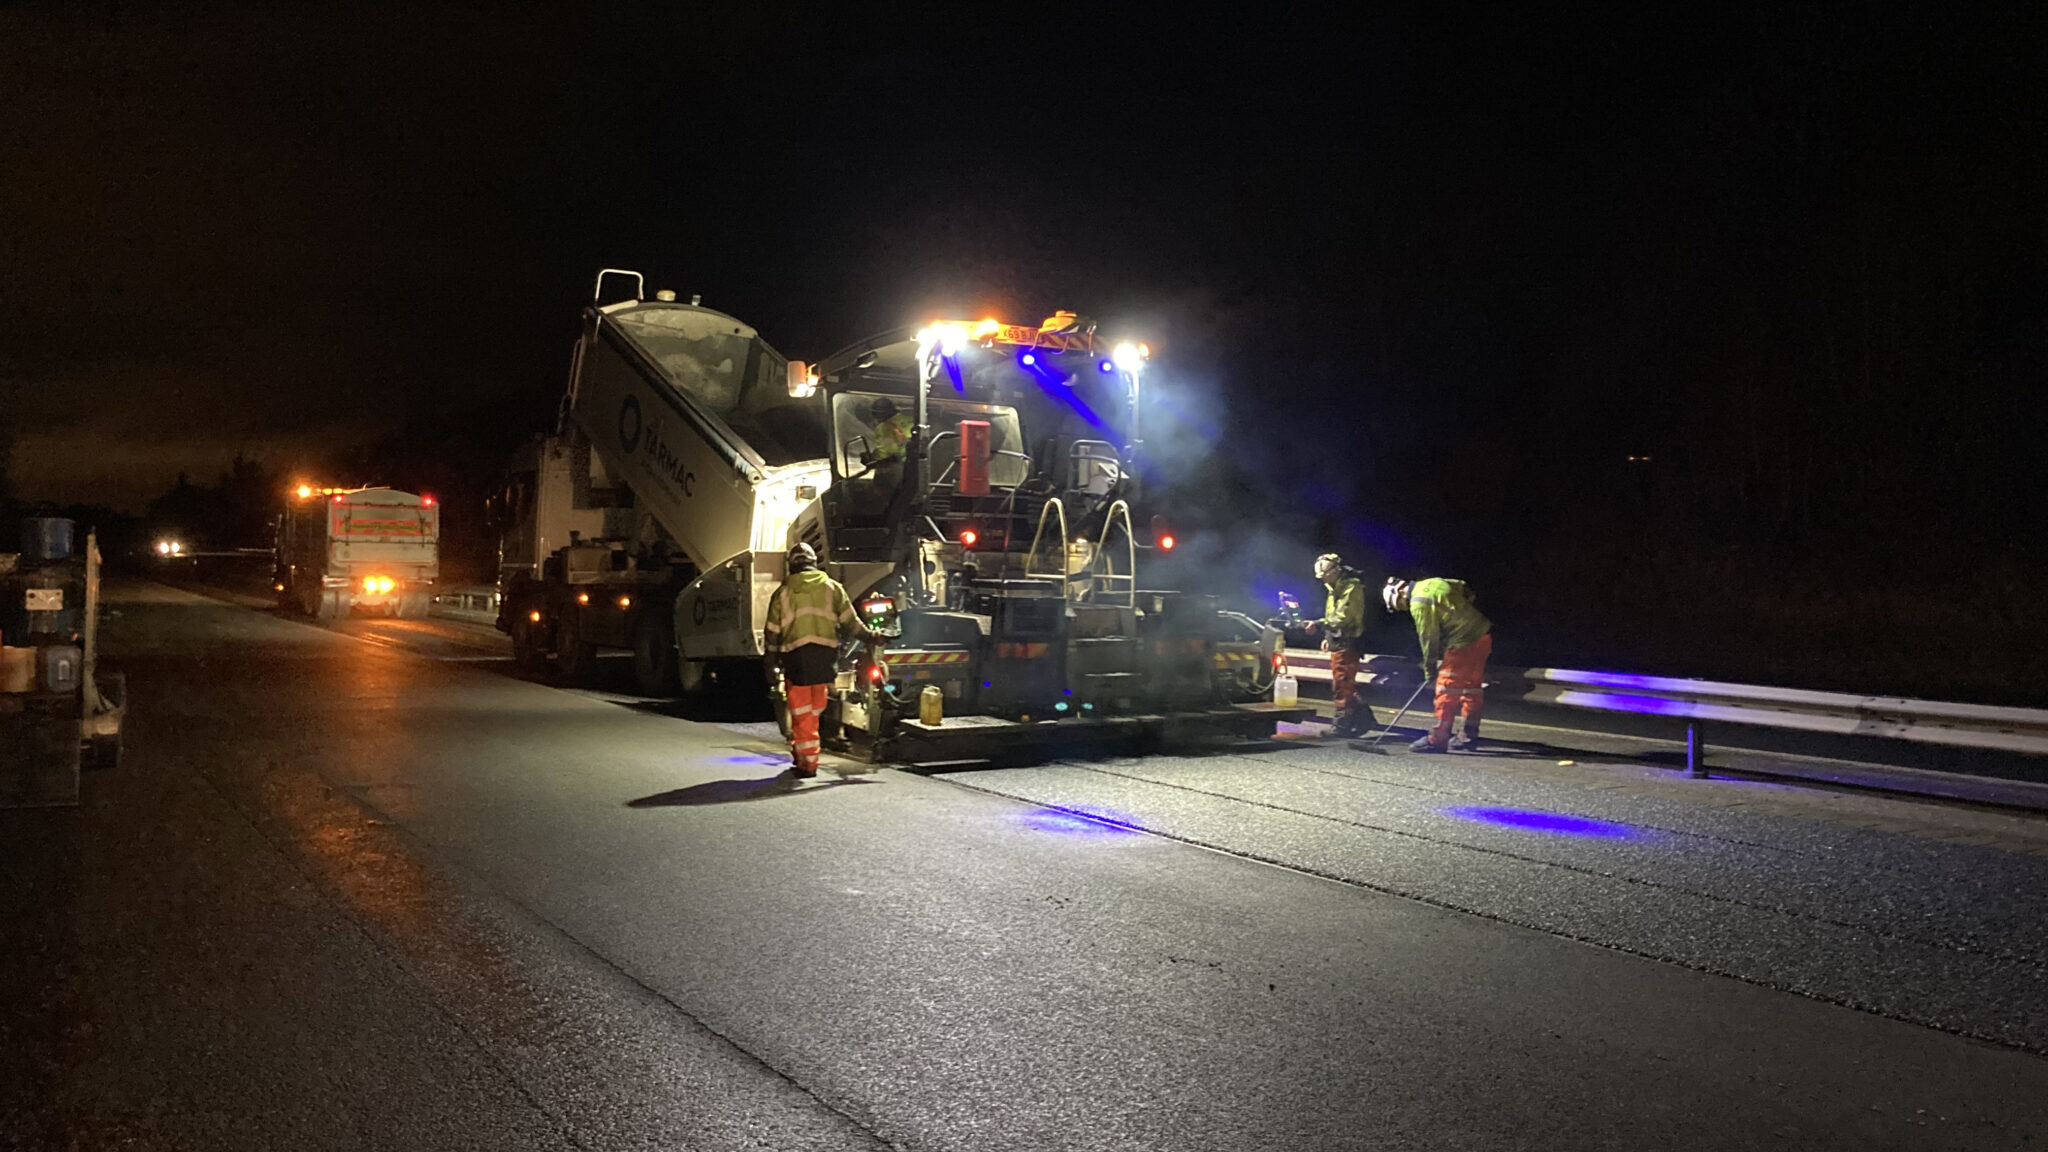 RESURFACING THE A7 SOUTH OF KINGSKNOWES ROUNDABOUT